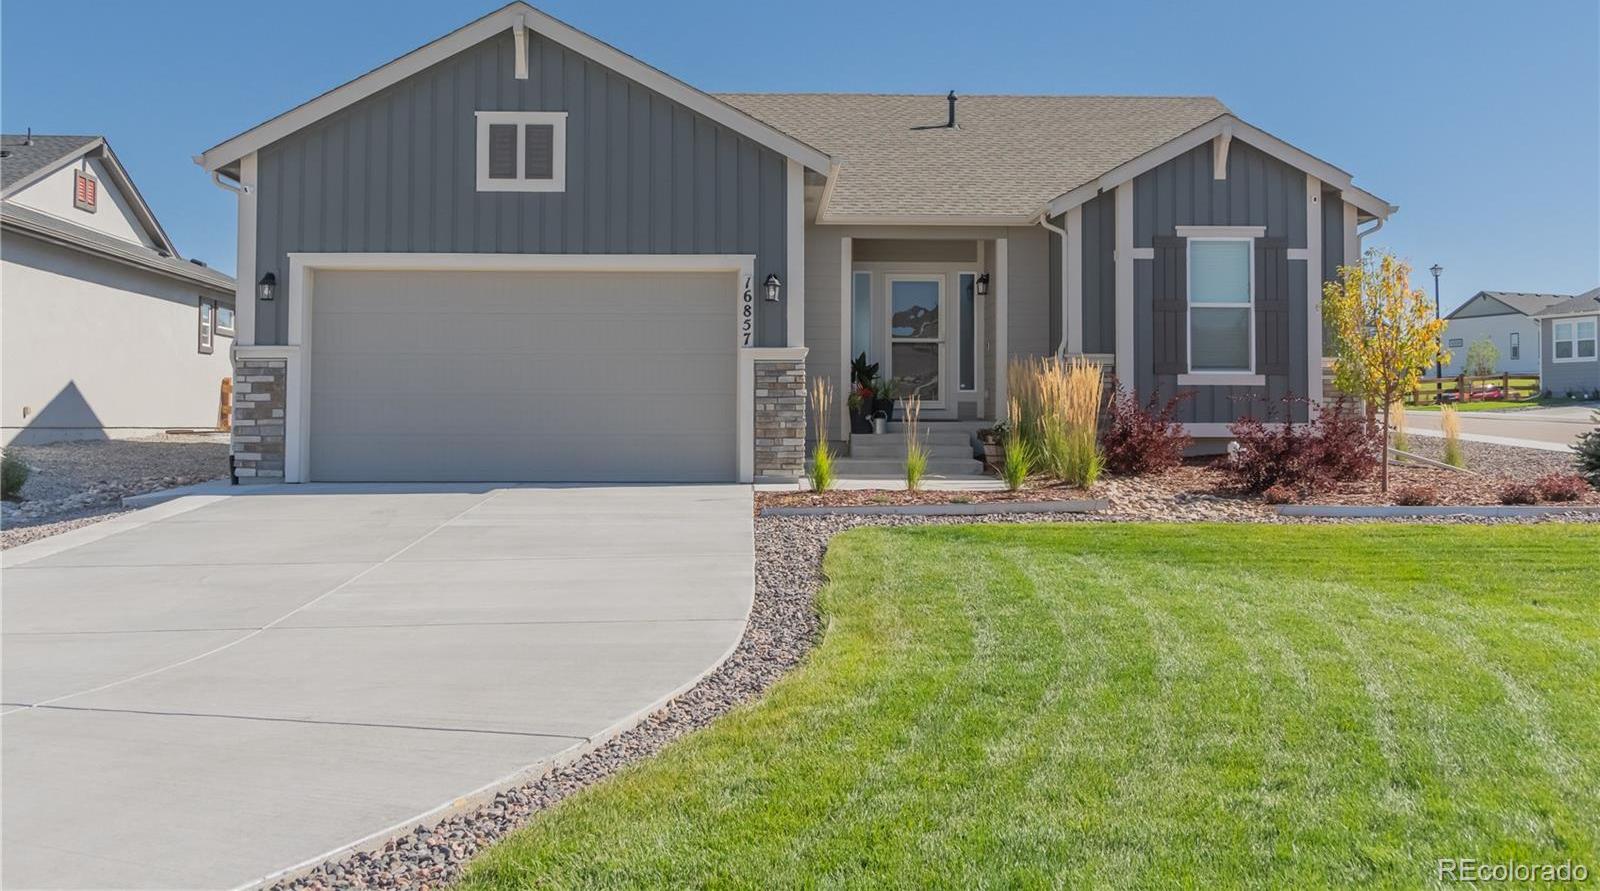 Photo one of 16857 Roaming Elk Dr Monument CO 80132 | MLS 3577231